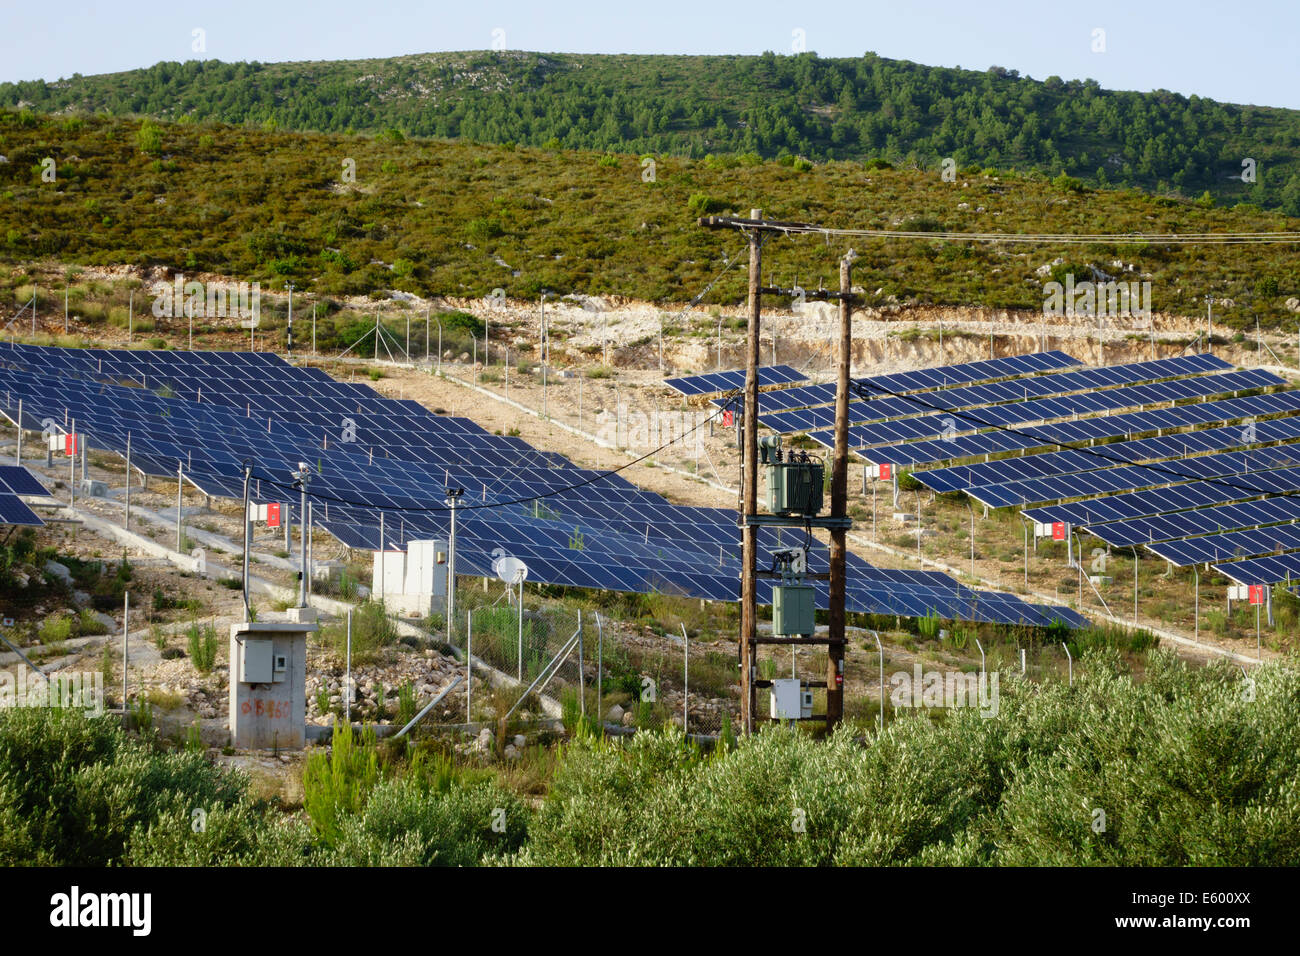 Zante, Greece - solar energy photovoltaic panel 'farm' in central Zante, in the middle of olive groves. Stock Photo